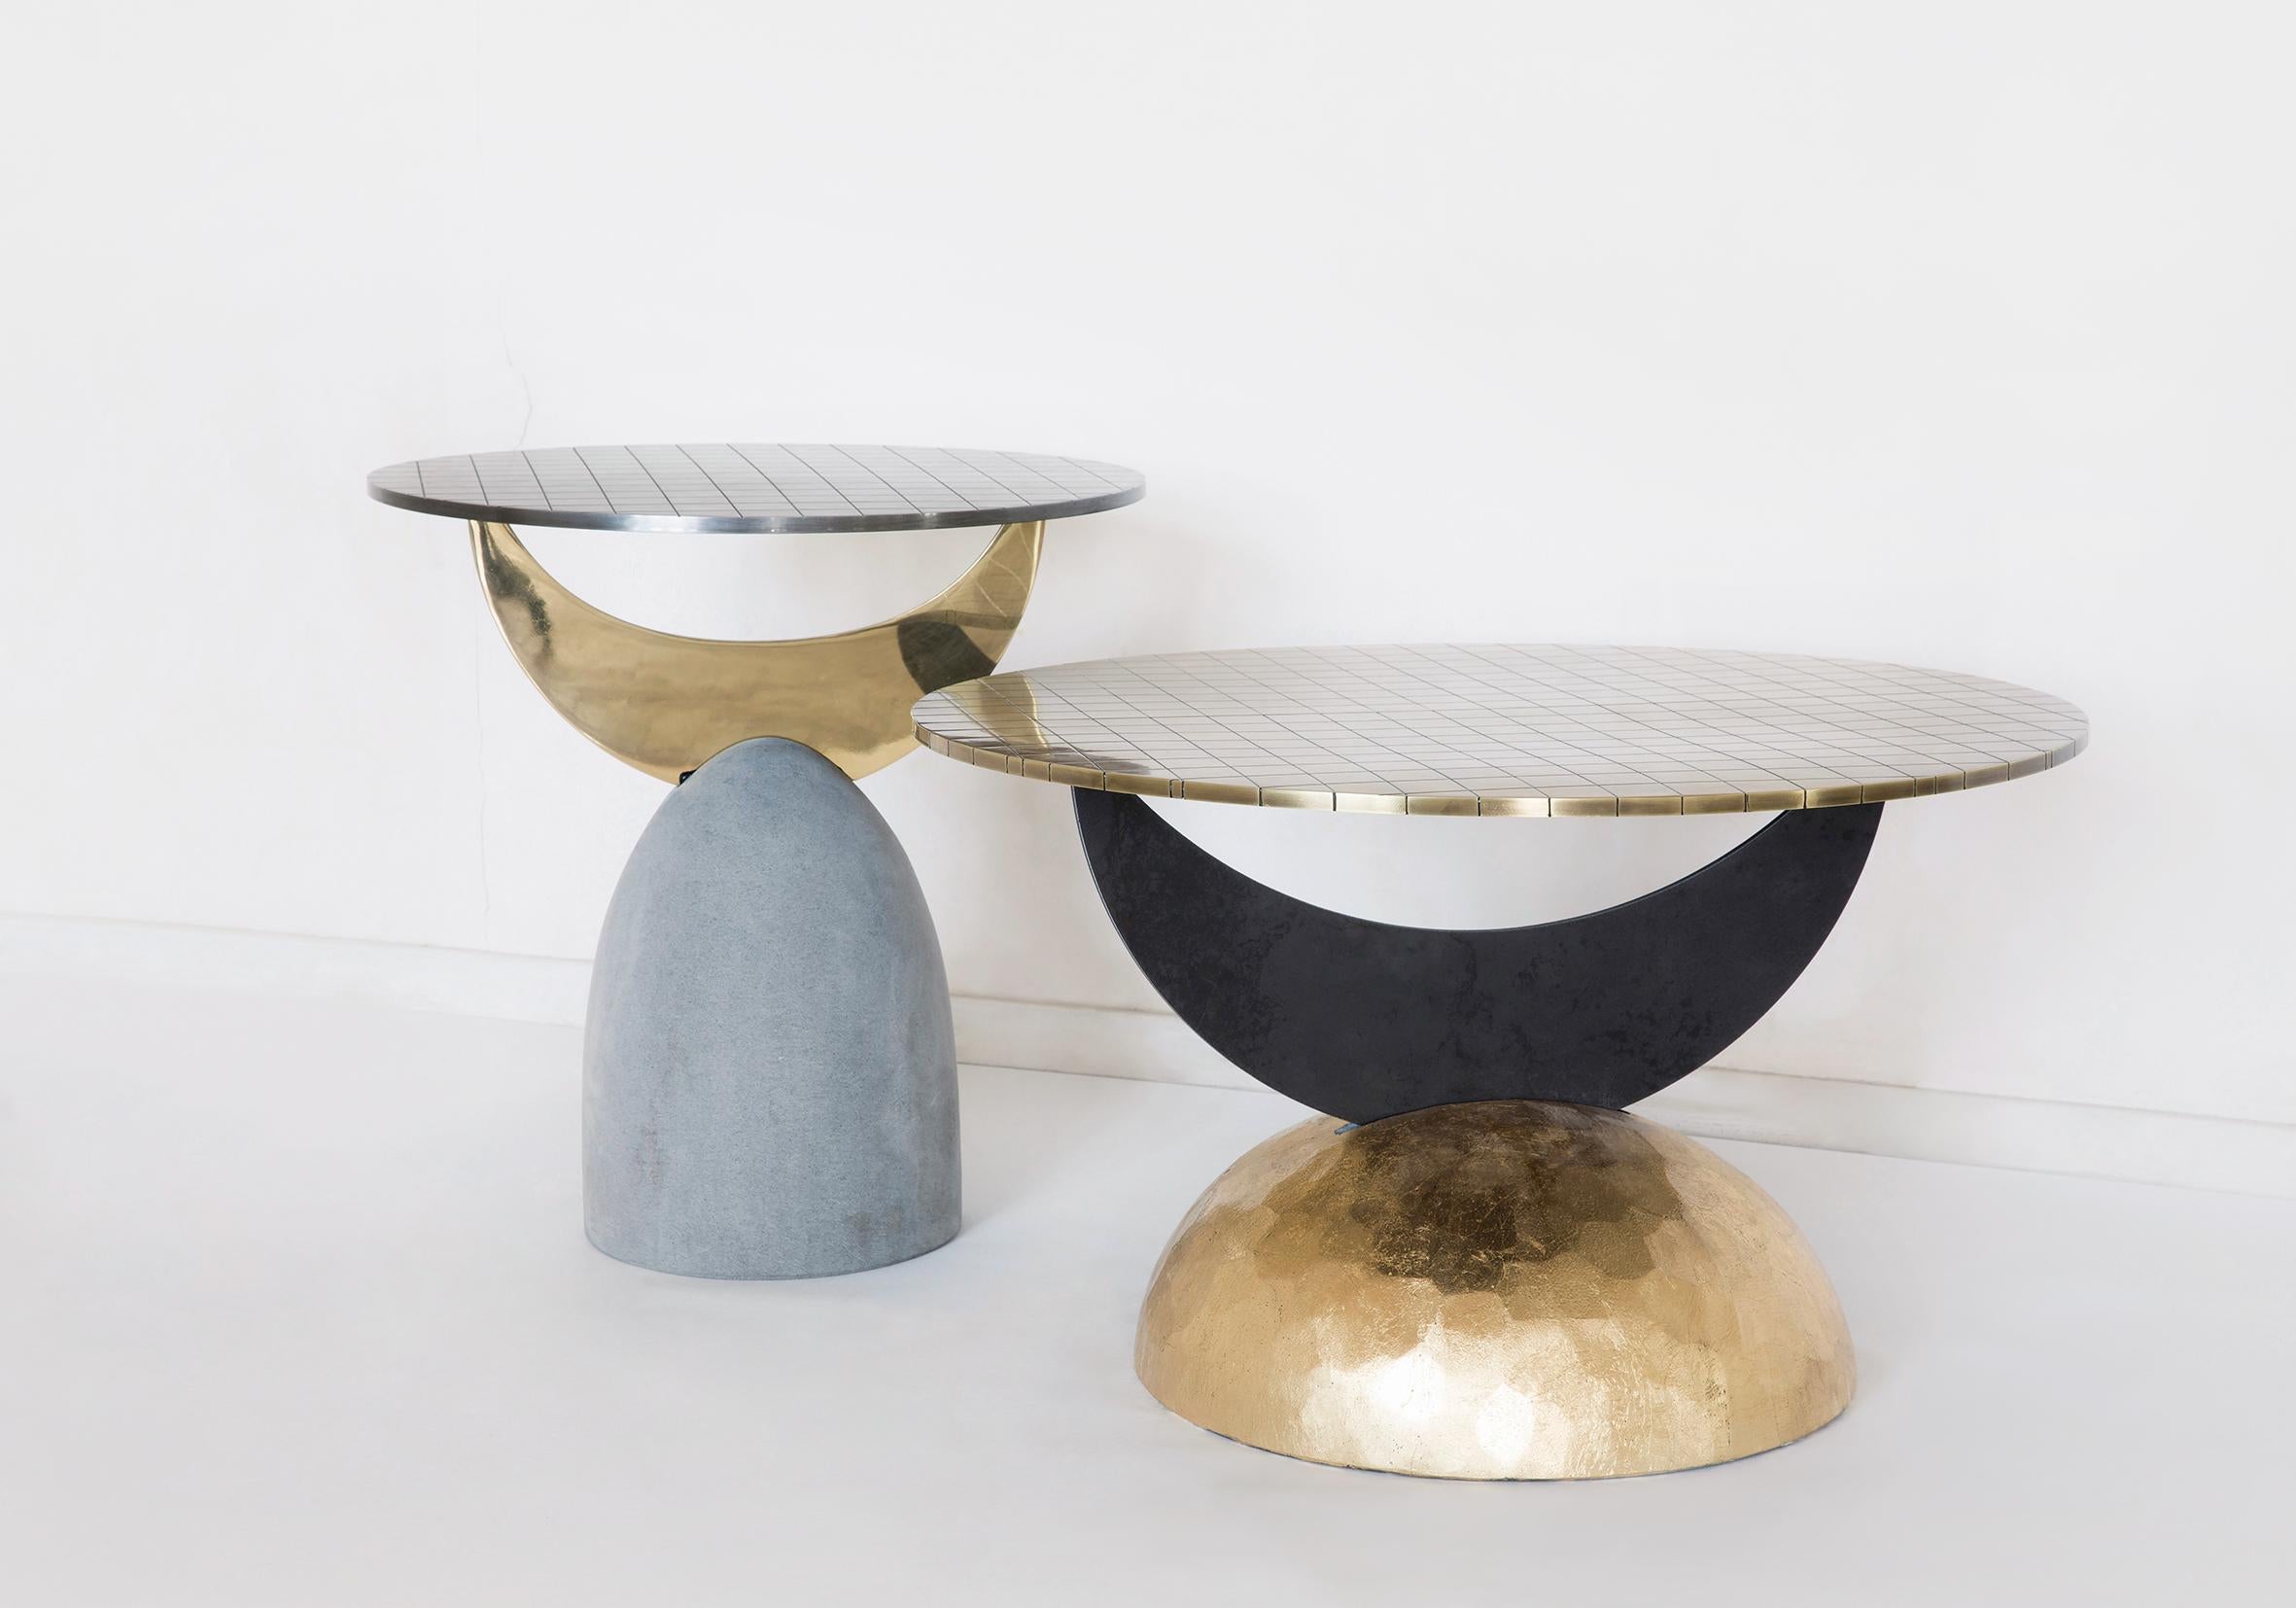 Metal Half Moon Coffee Table I

Materials: Basalt stone, steel

Half Moon Coffee Table I, composed of solid combination of stone and metals, is a part of Rooms Studio’s Wild Minimalism collection. The painted stone base is carved into a semicircle